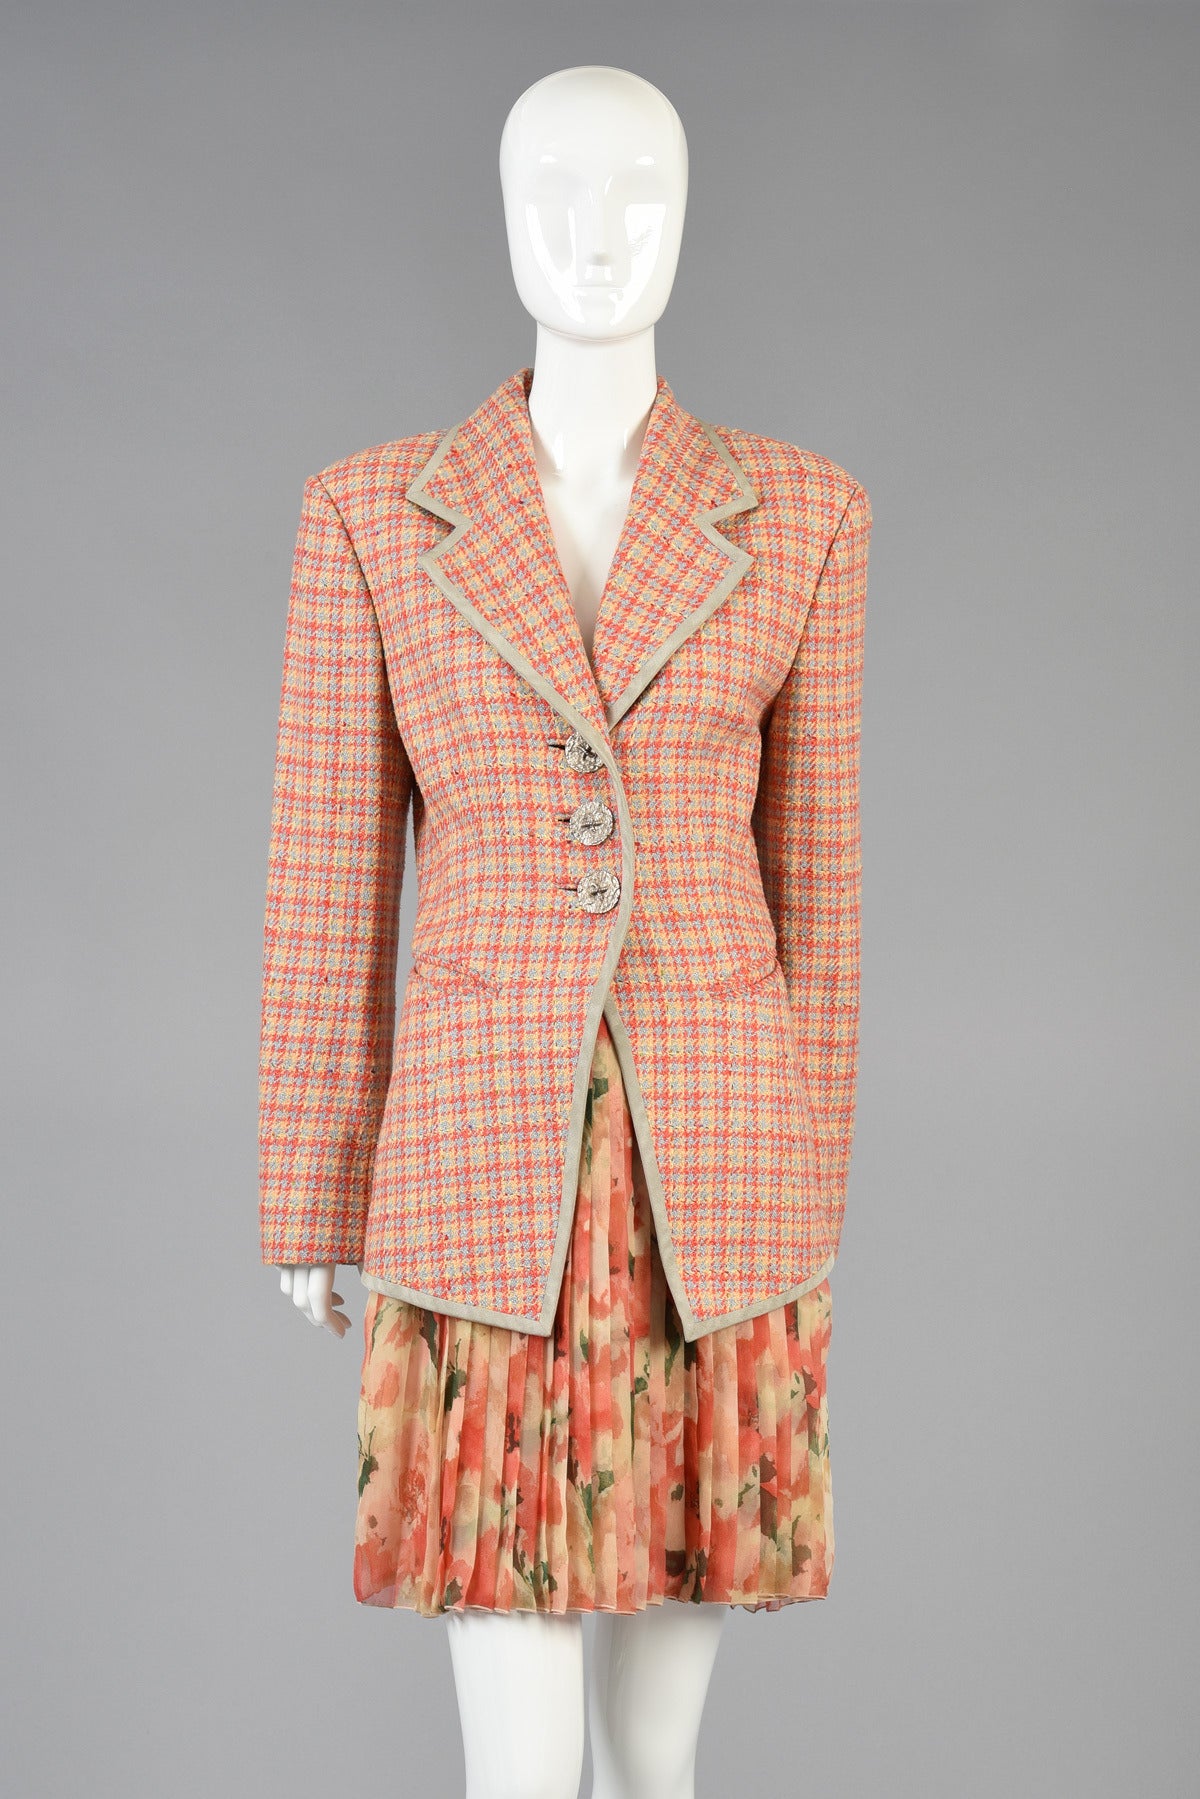 Super cute 1990's Christian Dior Boutique numbered houndstooth jacket. Super awesome find and easy to style with any wardrobe! Pale coral, grey and yellow houndstooth body with grey silk trim and oversized silver metal buttons.  Fully lined in silk.